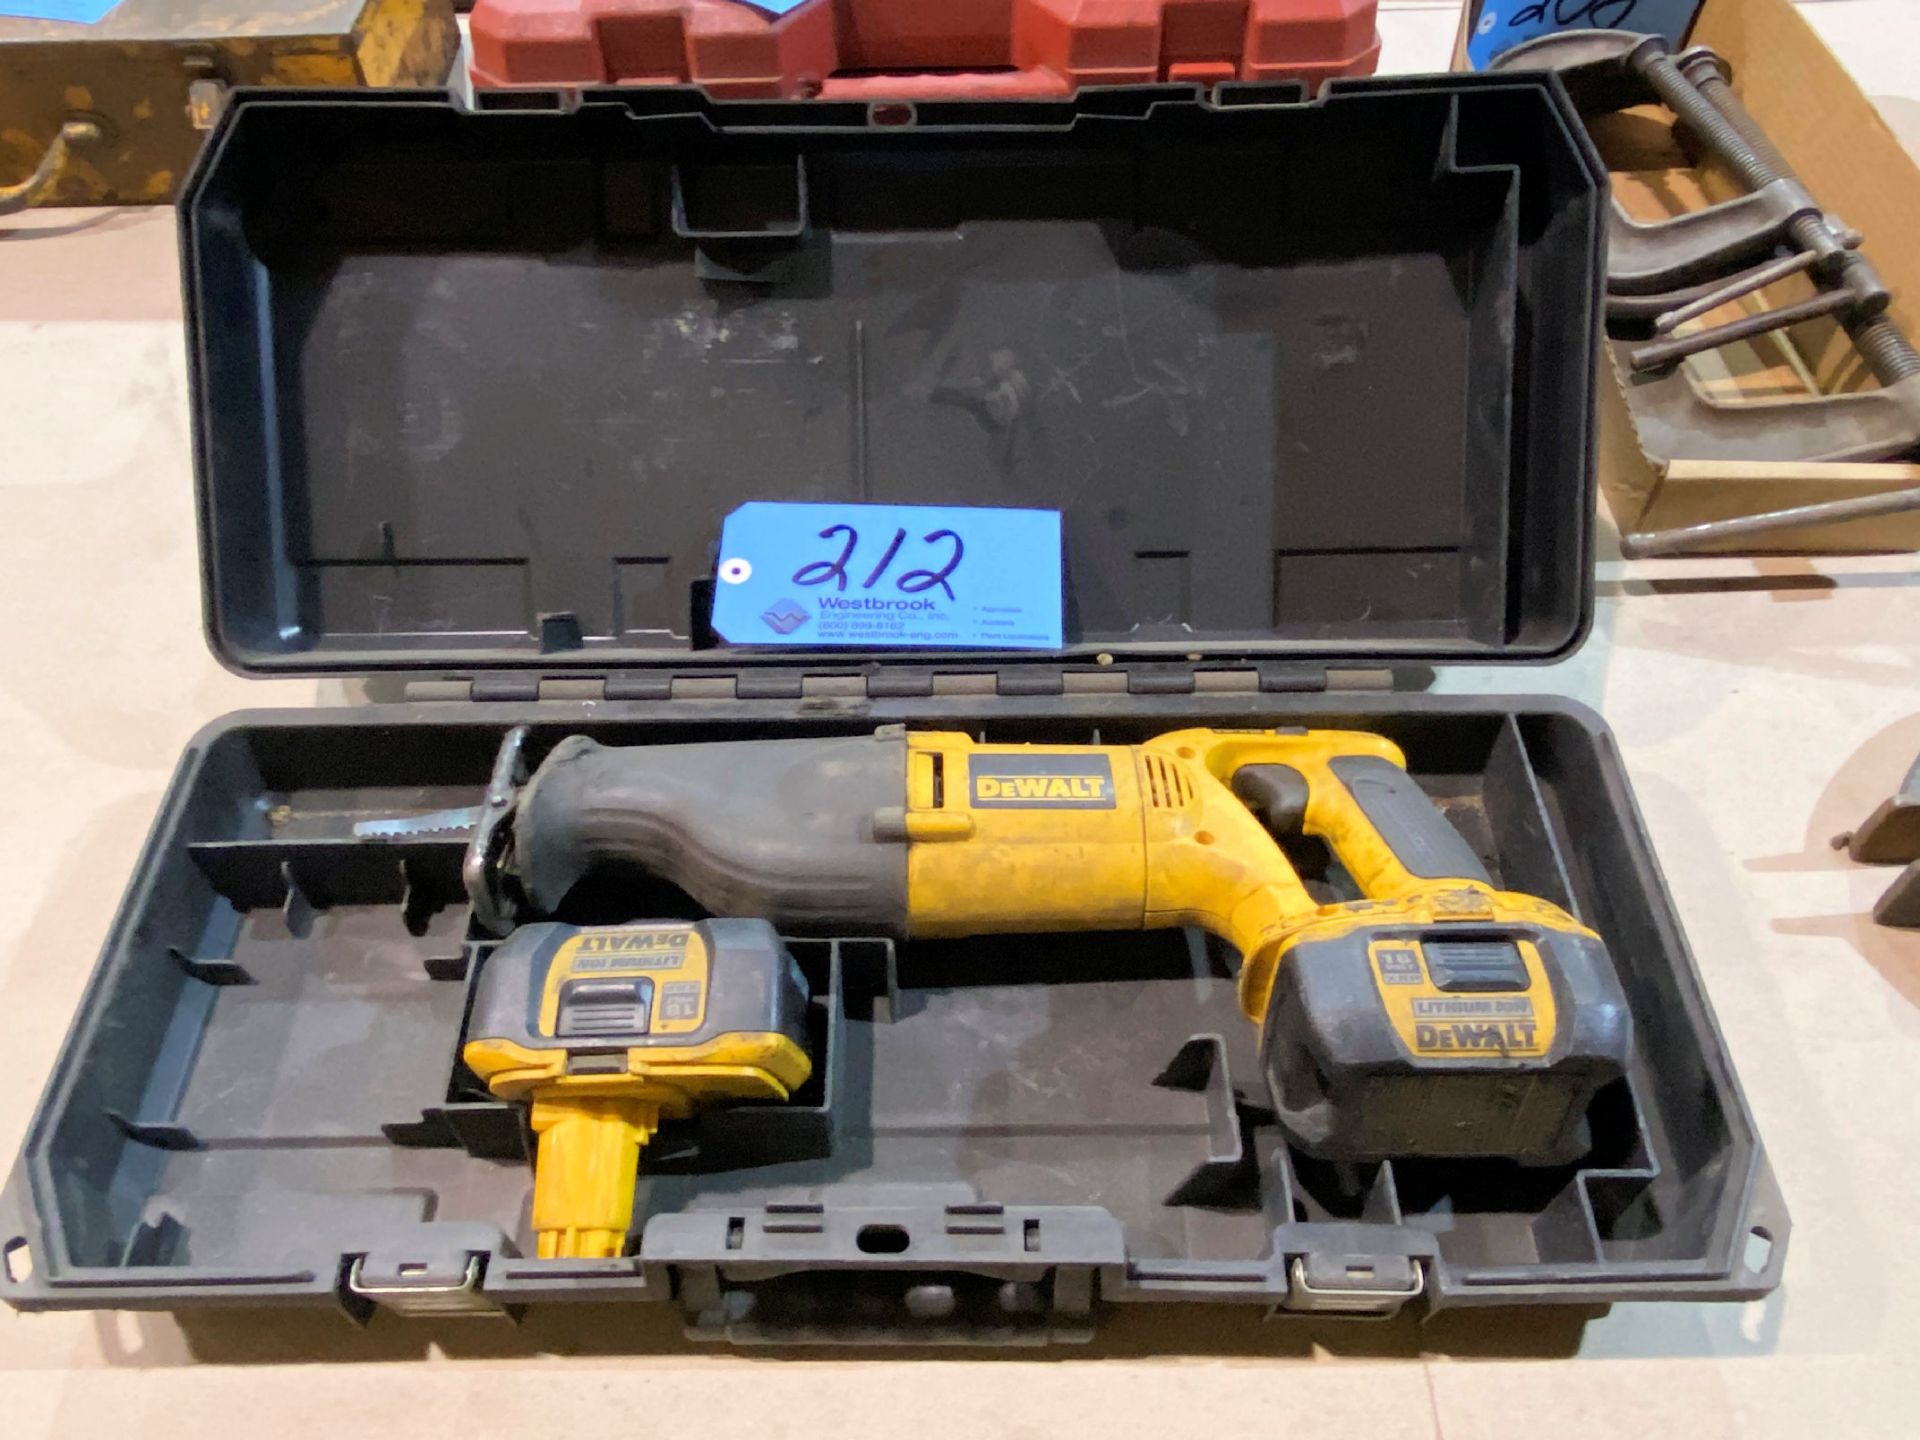 DeWalt DW938, 18-Volt Cordless Reciprocating Saw with (2) Batteries and Case